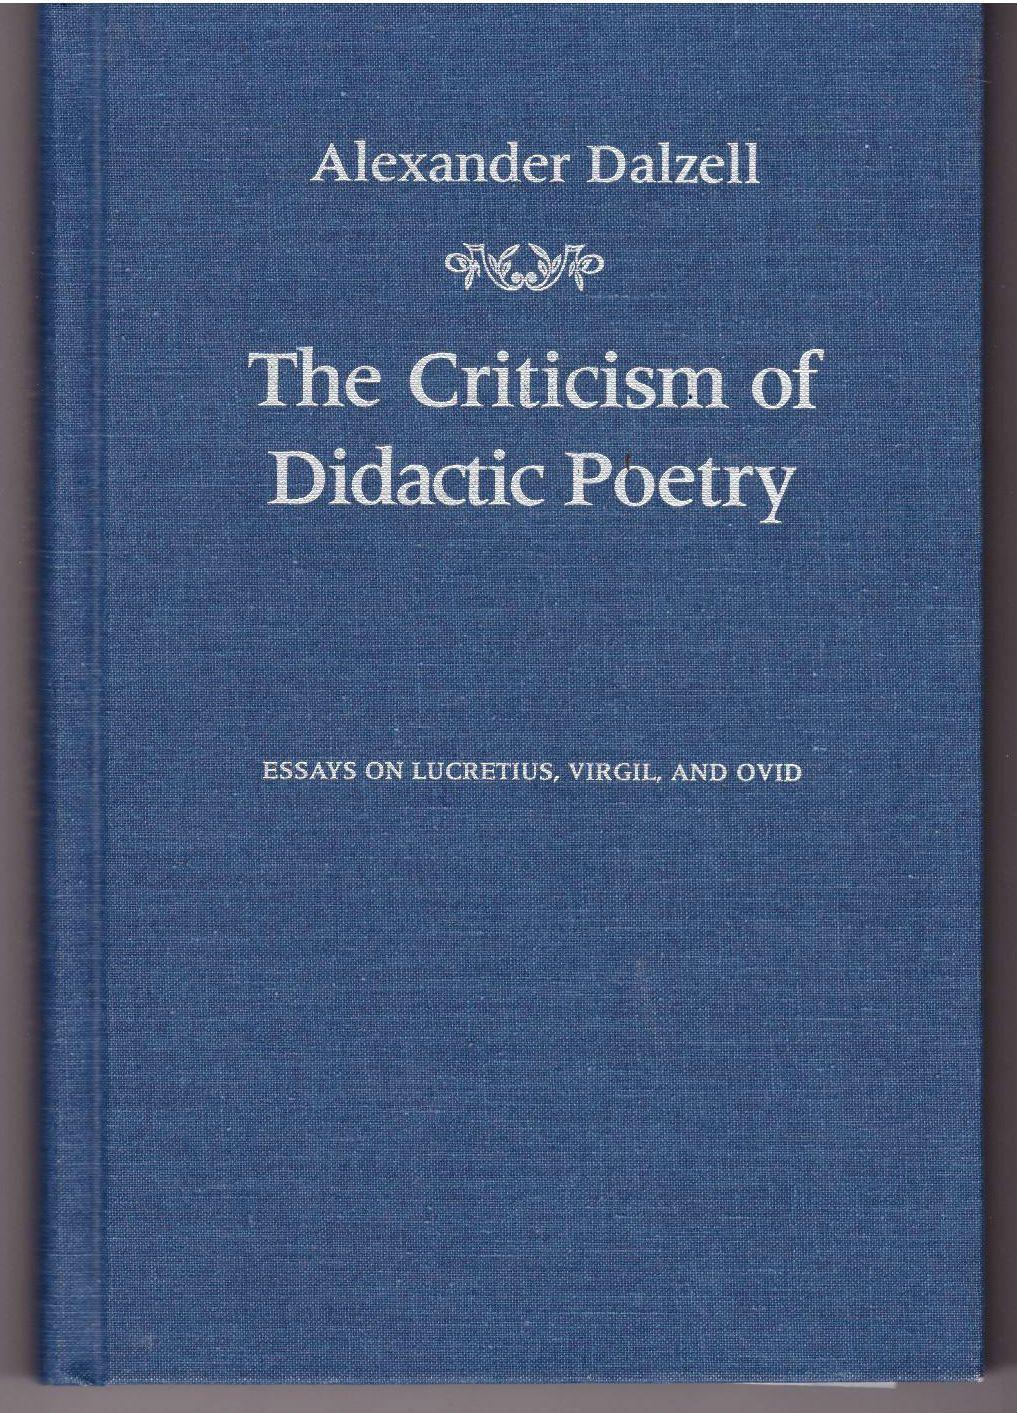 The Criticism of Didactic Poetry: Essays on Lucretius, Virgil, and Ovid (Robson Classical Lectures) - Dalzell, Alexander